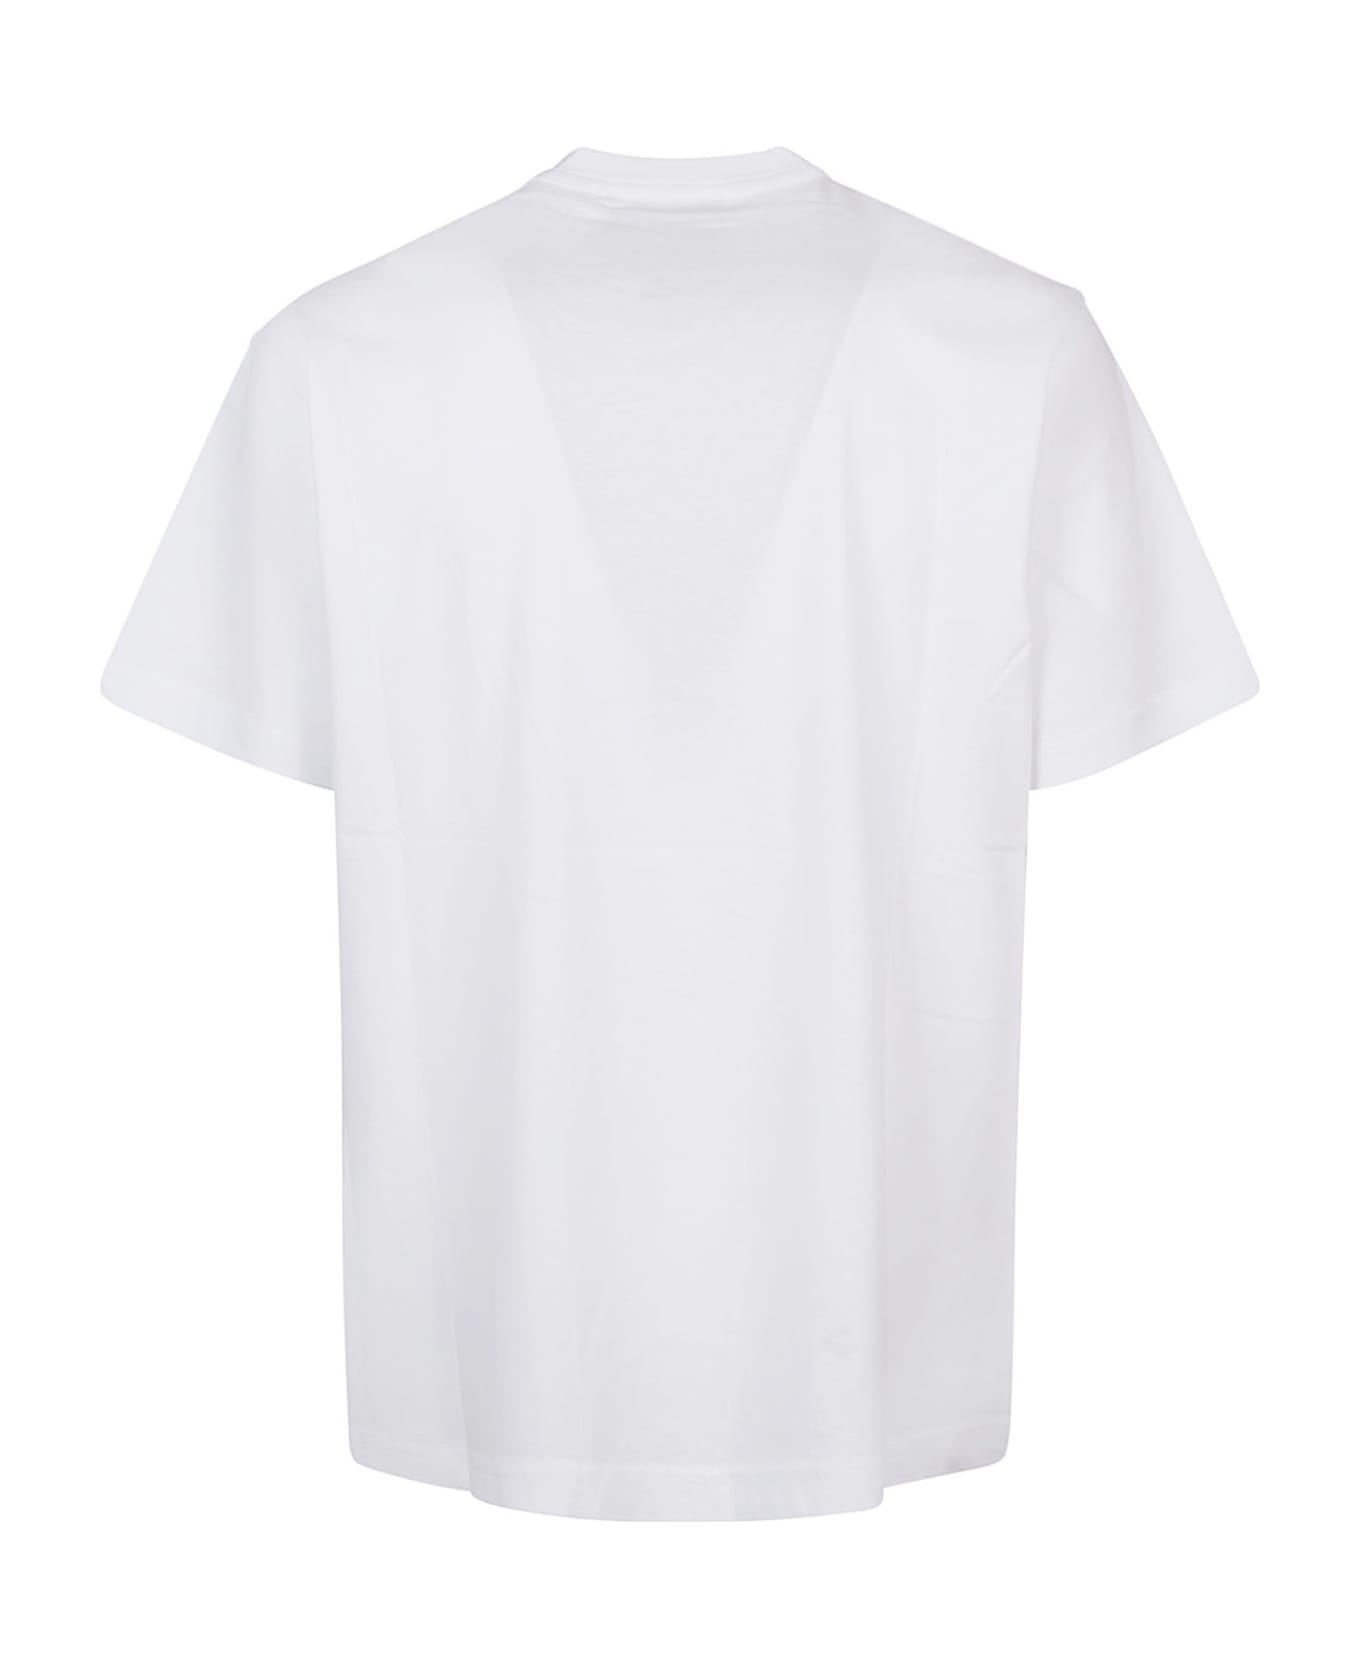 Versace Jeans Couture Patch Logo T-shirt - White シャツ